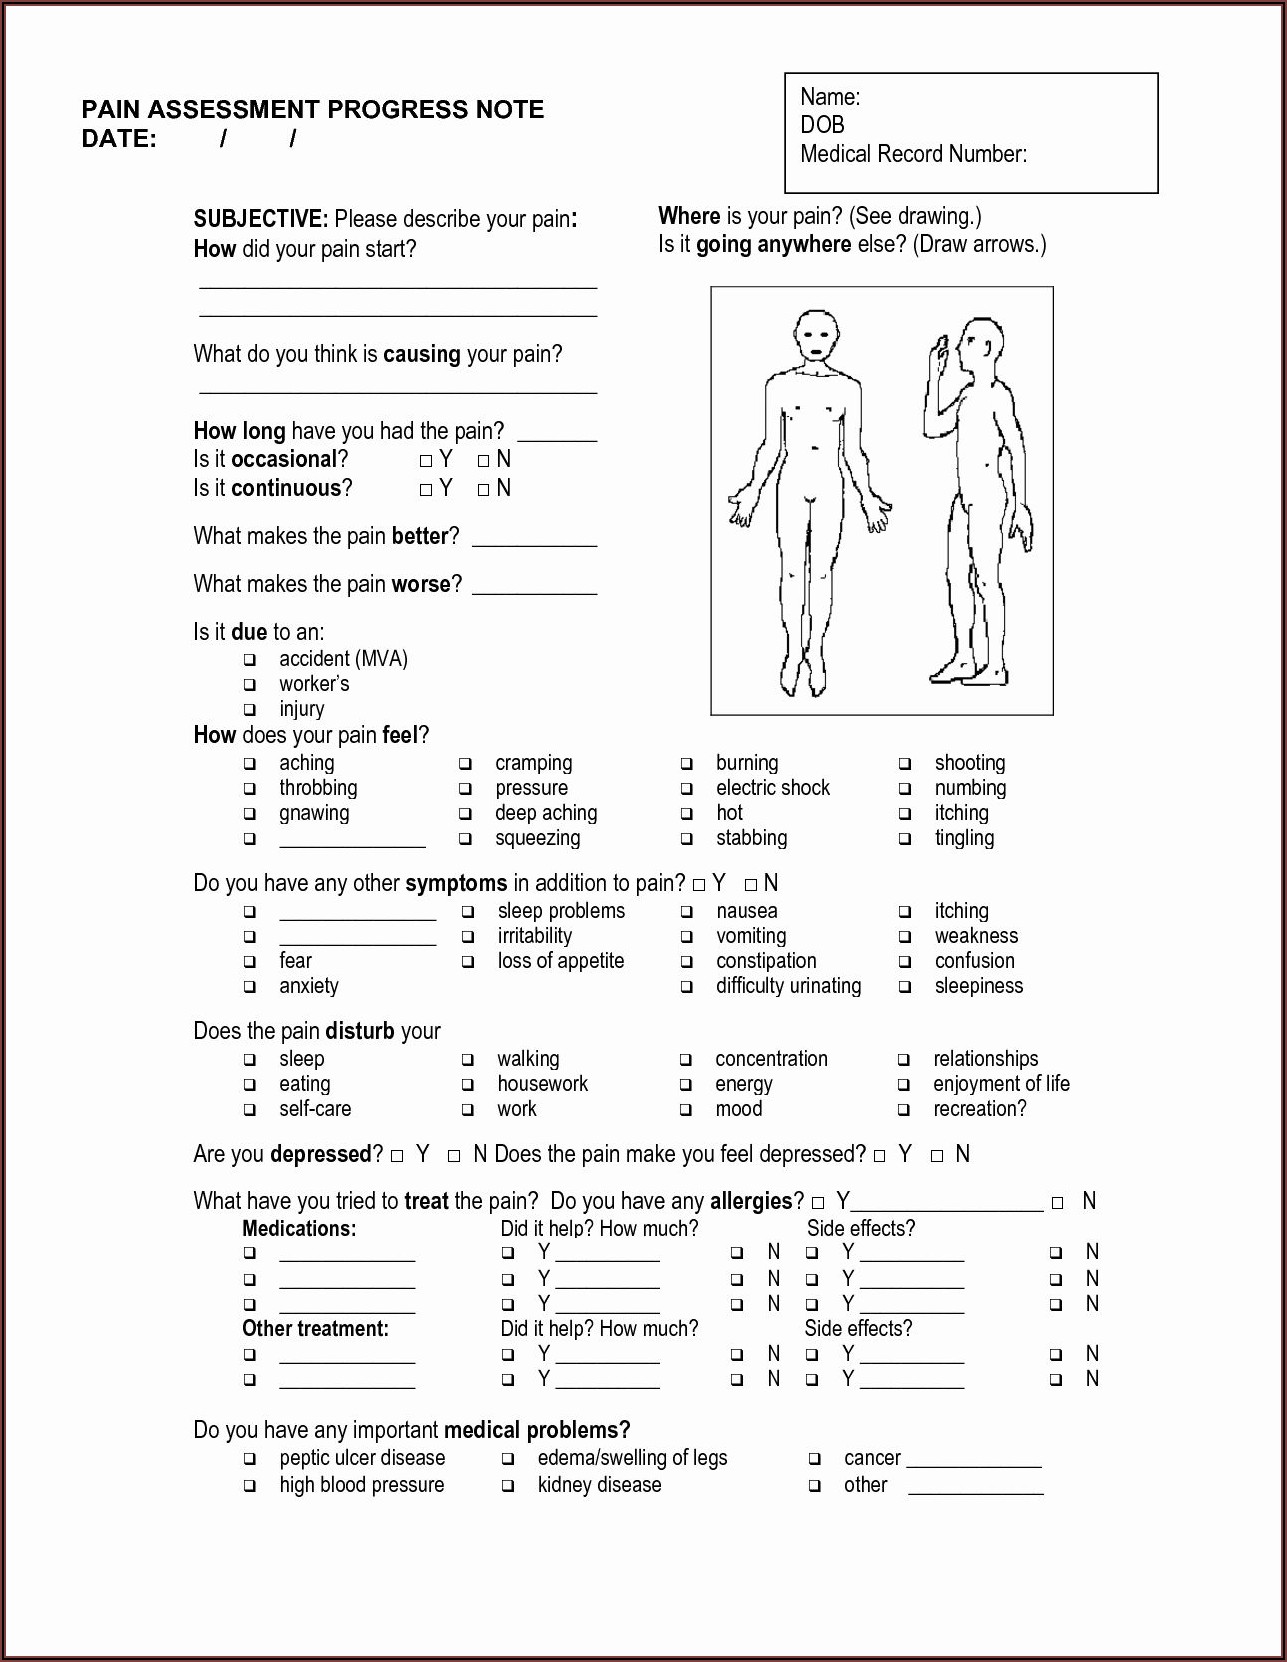 Acupuncture Soap Note Template